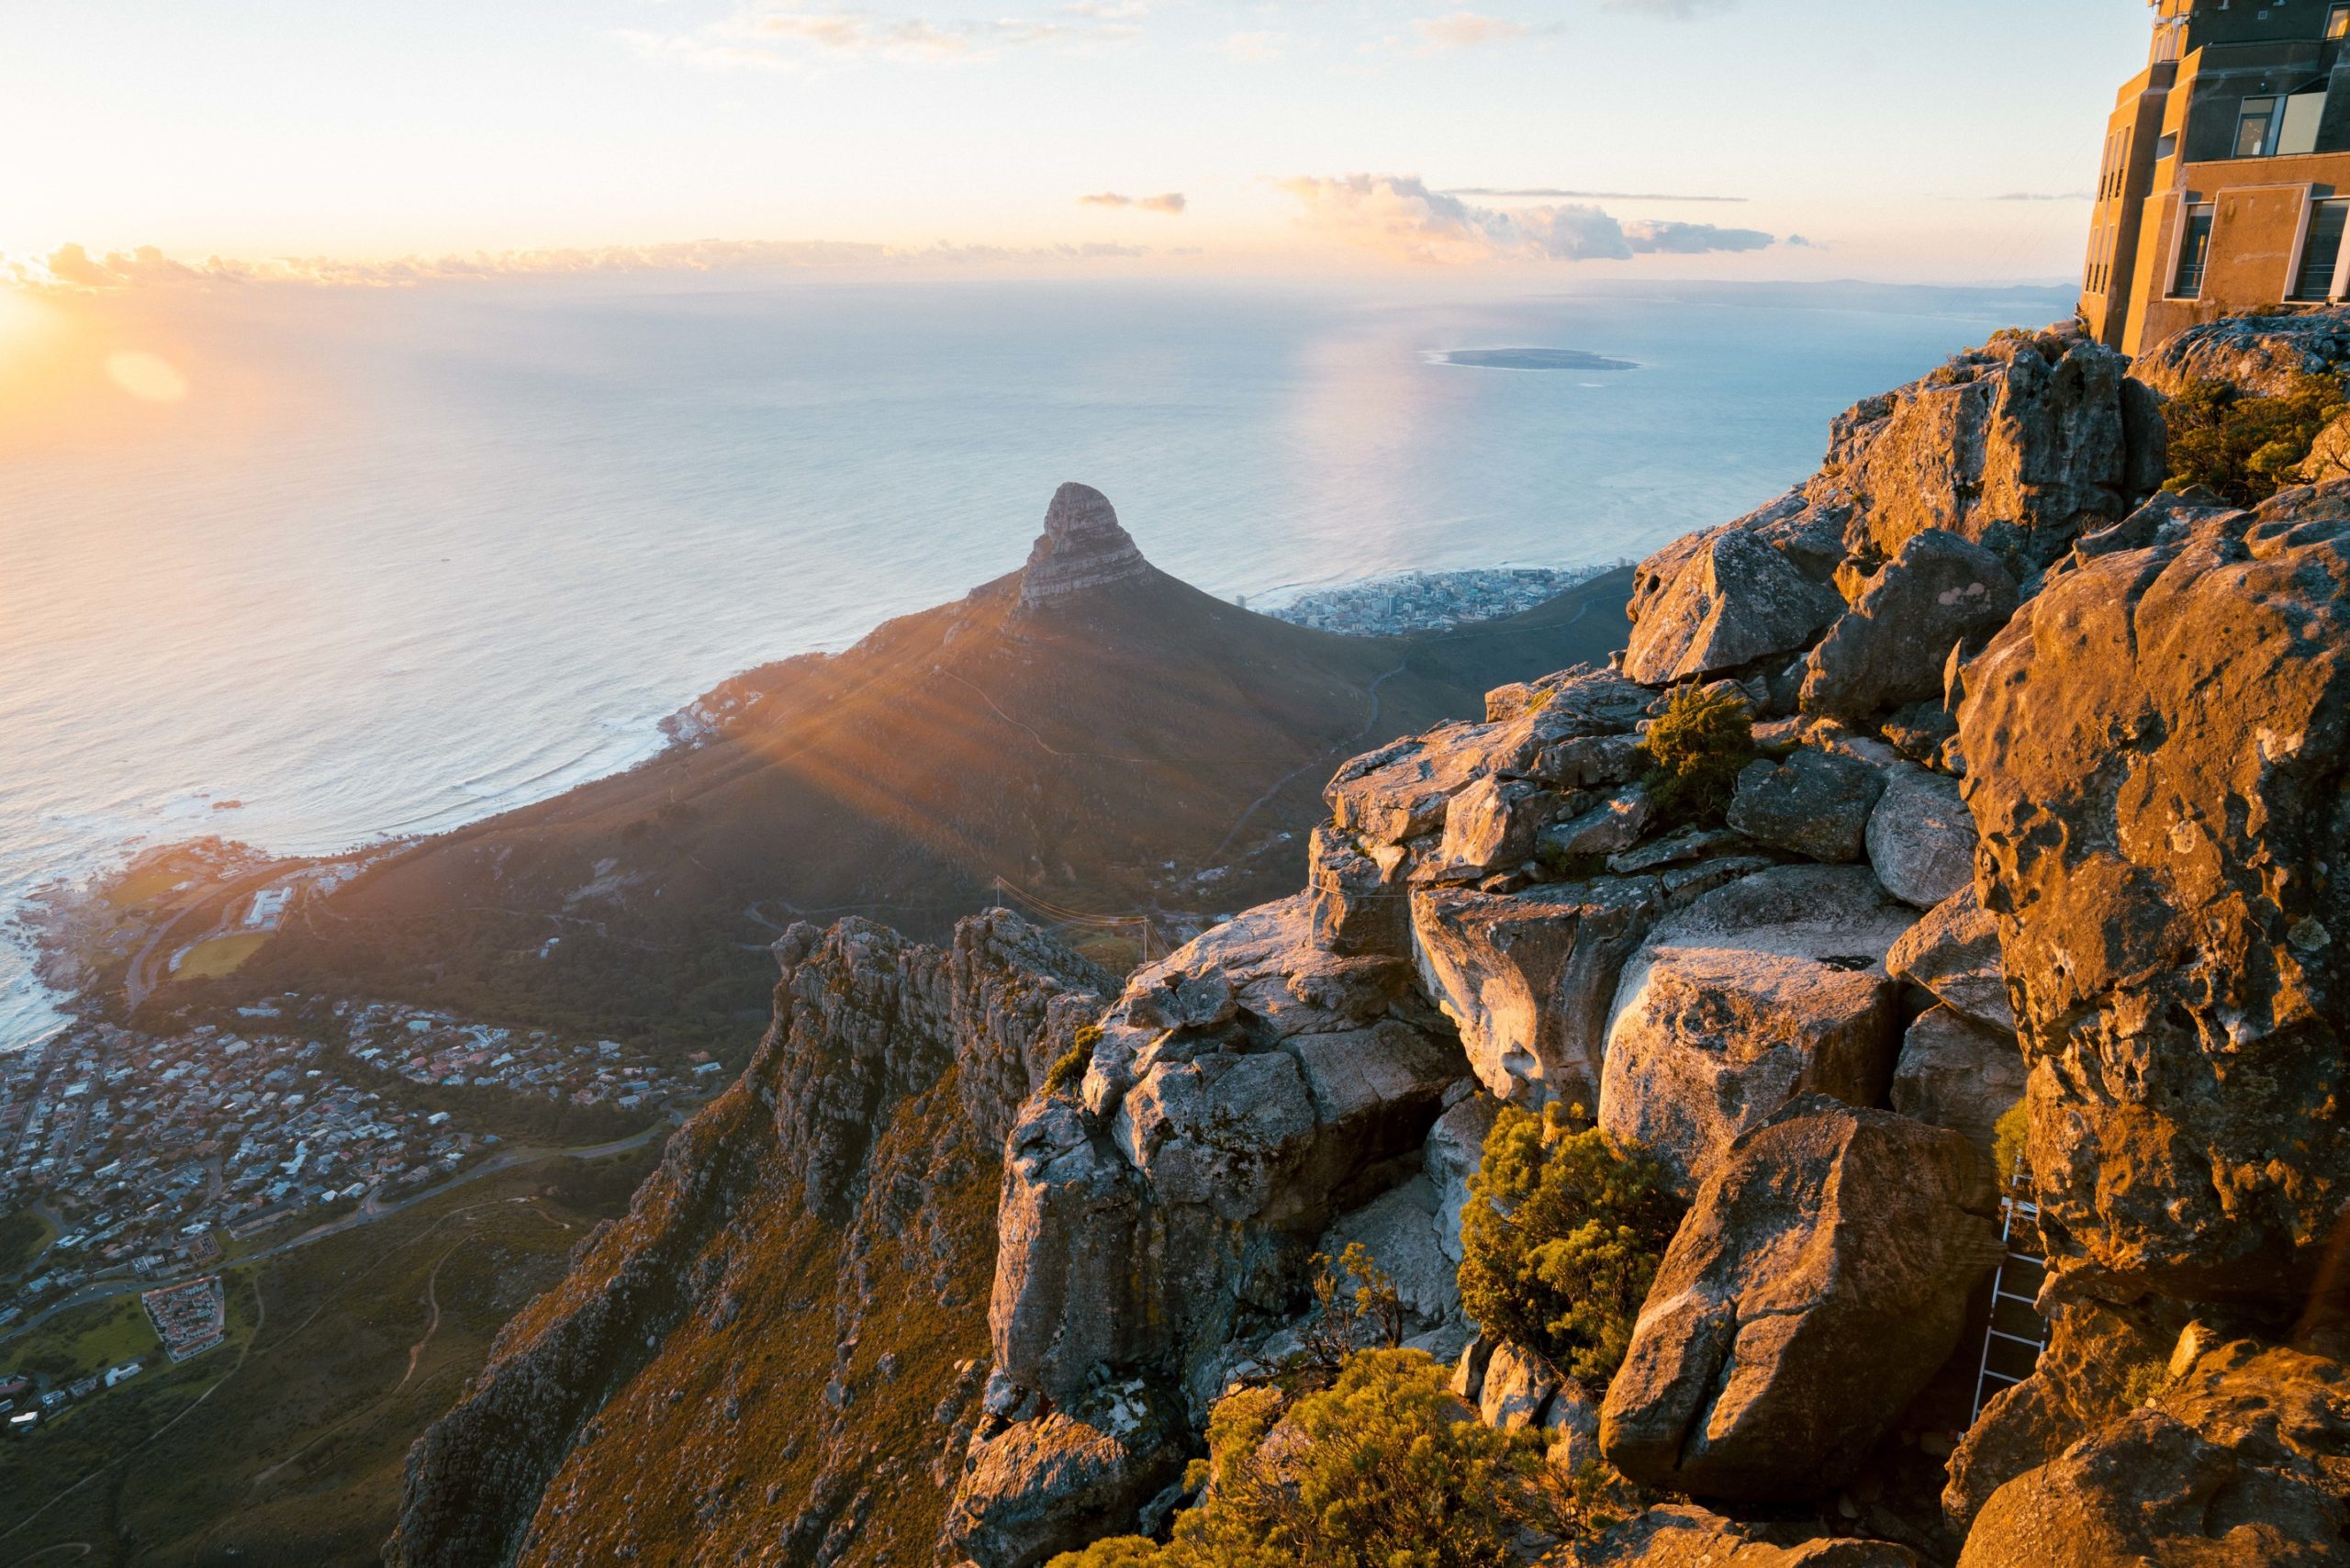 view of Lion's Head Rock formation from Table Mountain in Cape Town, South Africa